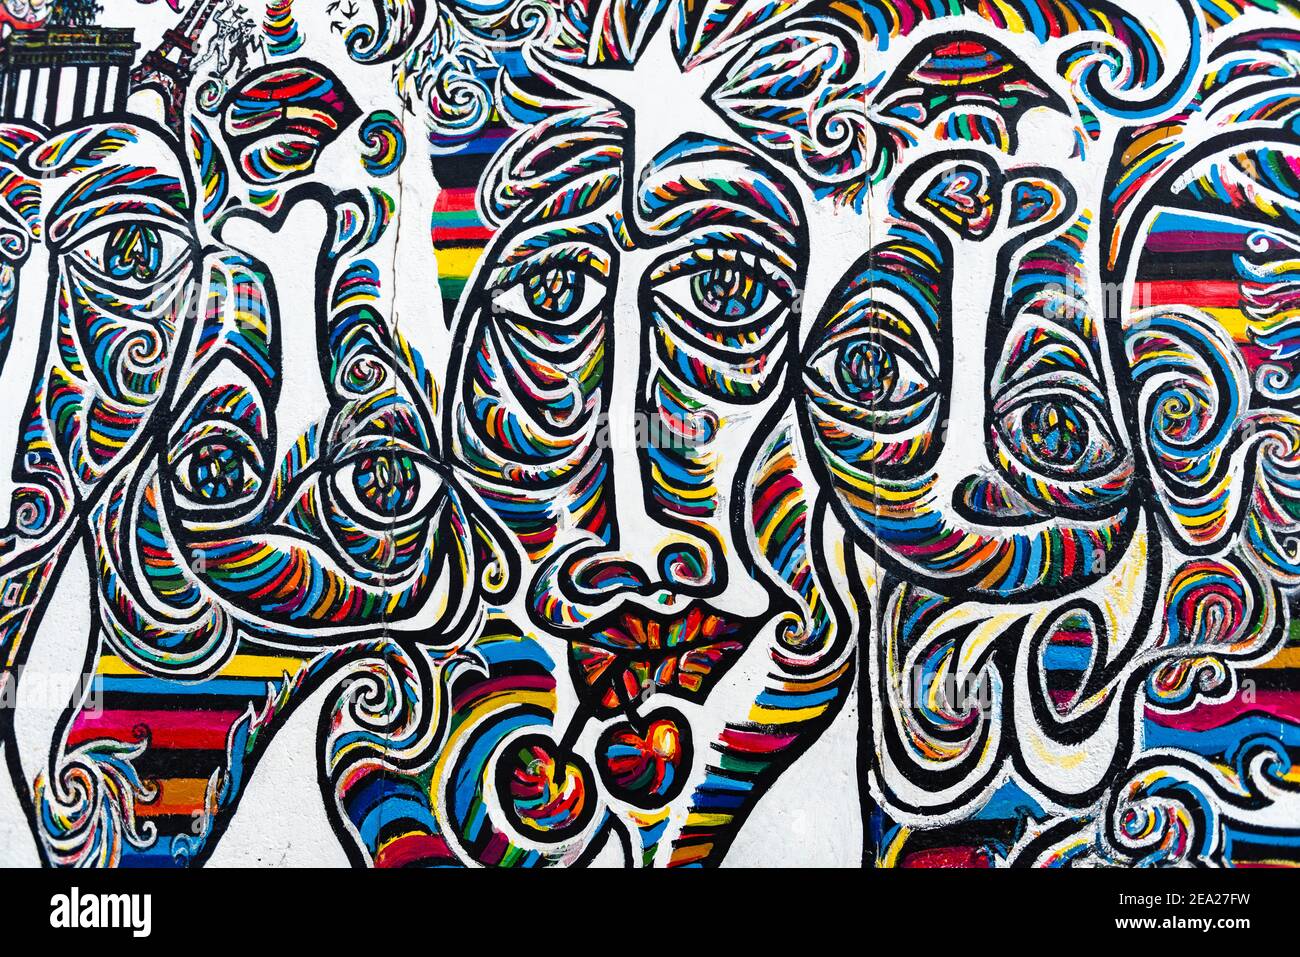 Graffiti We are one people, mural with colorful faces, artist Shamil Gimayev, East Side Gallery, Friedrichshain, Berlin, Germany Stock Photo